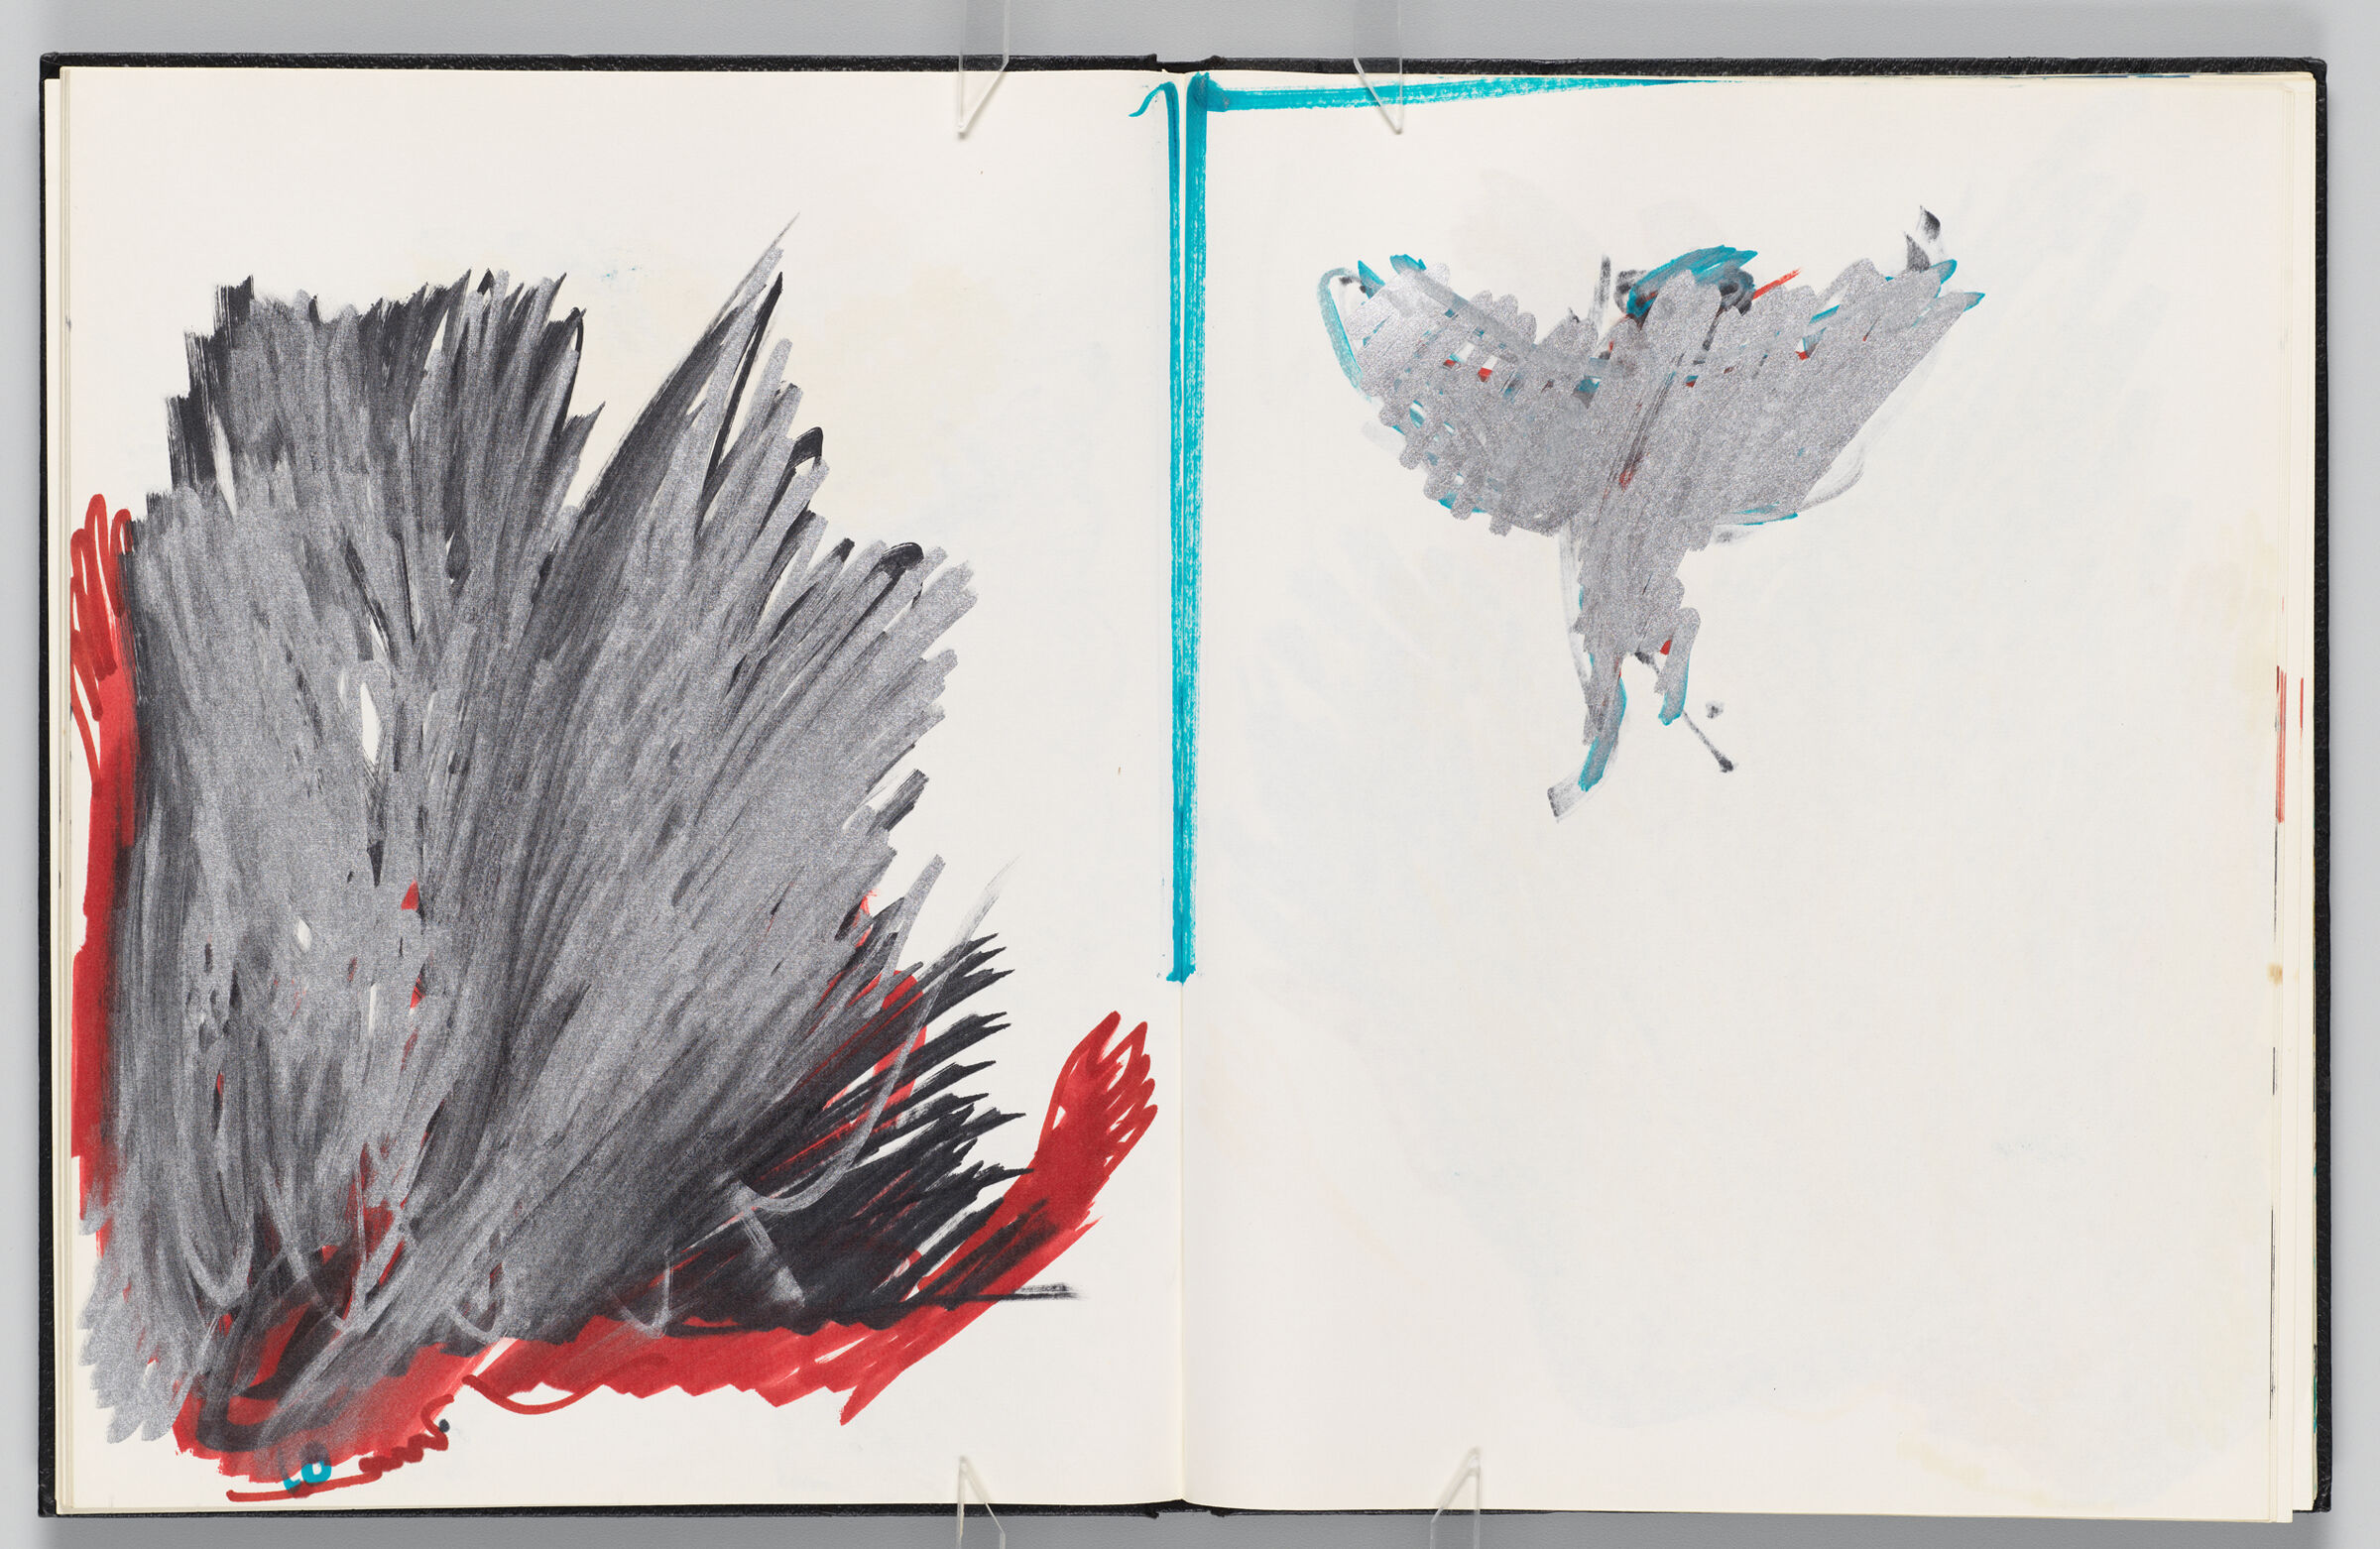 Untitled (Icarus, Left Page); Untitled (Icarus, Right Page)